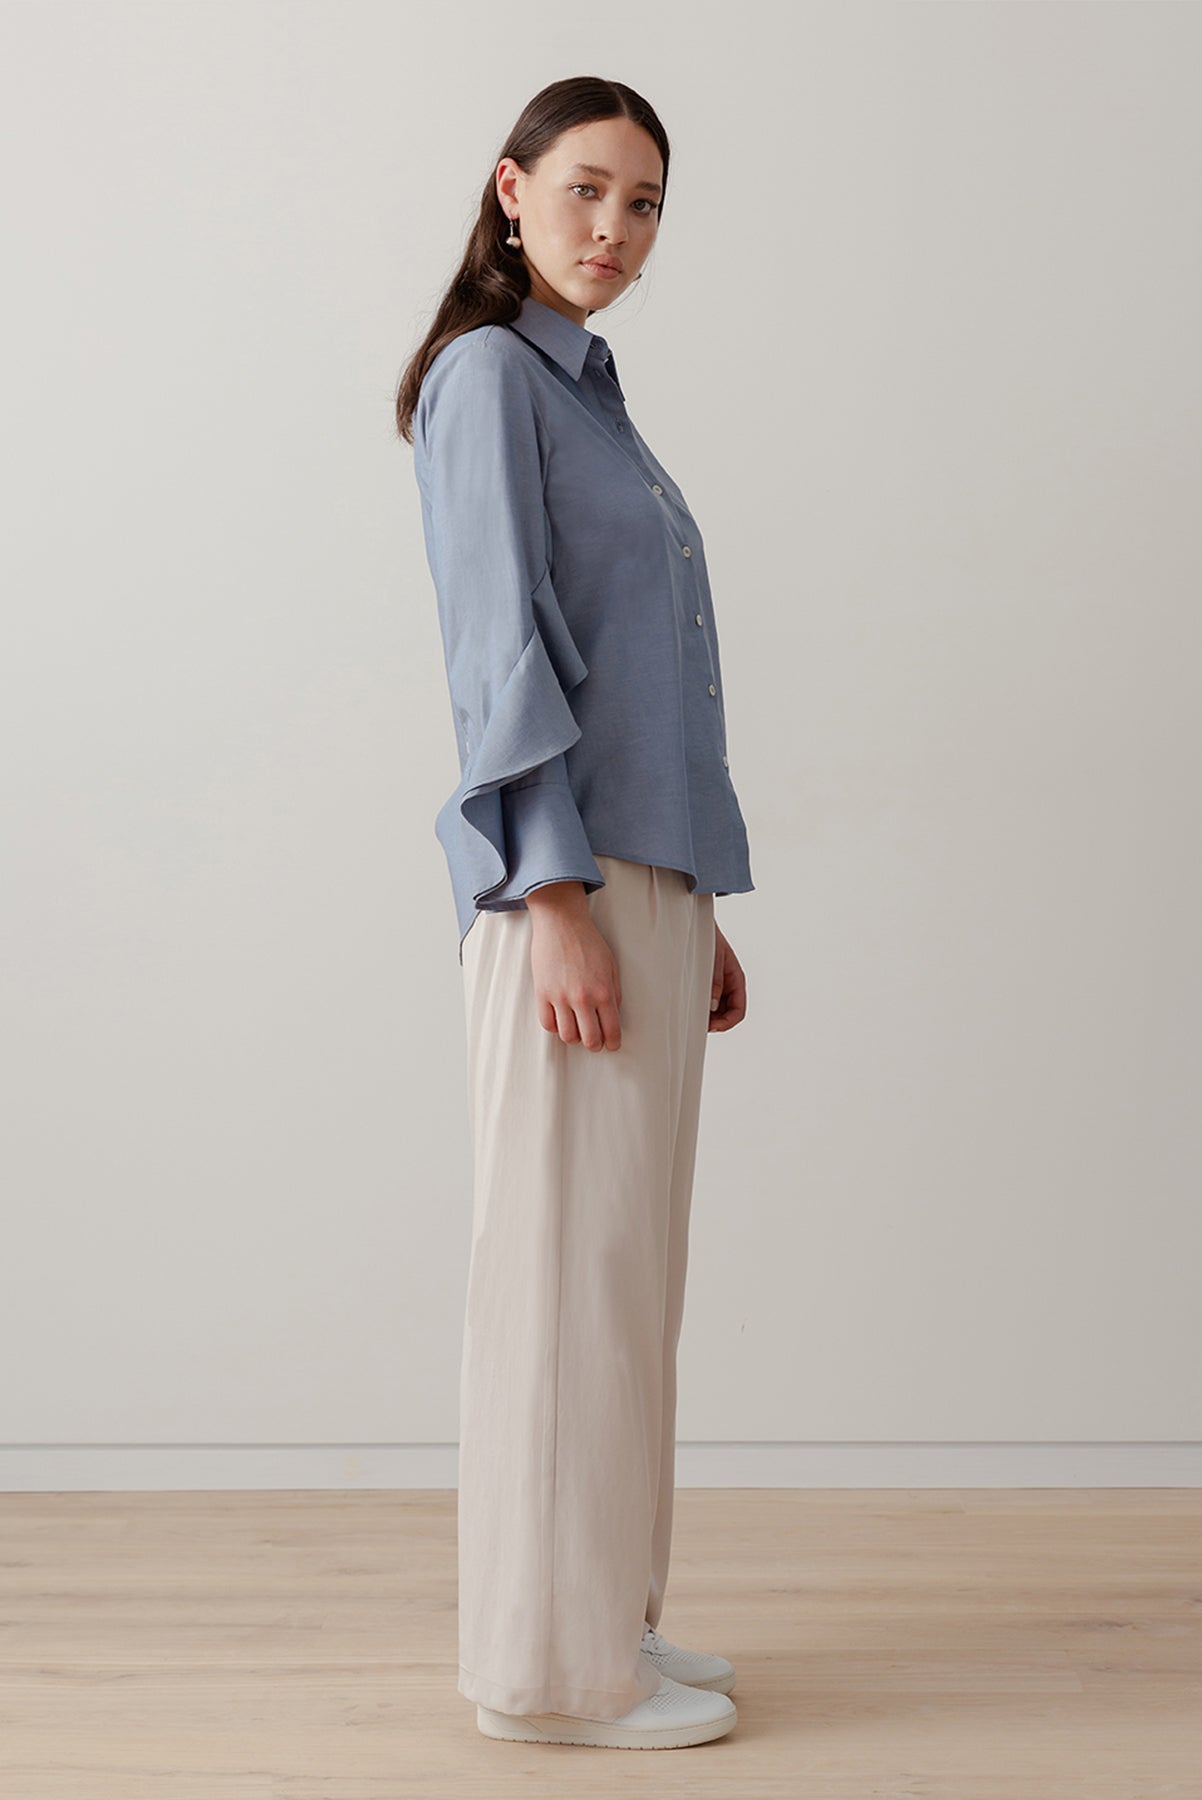 Oyster Shirt - Chambray - LOCLAIRE